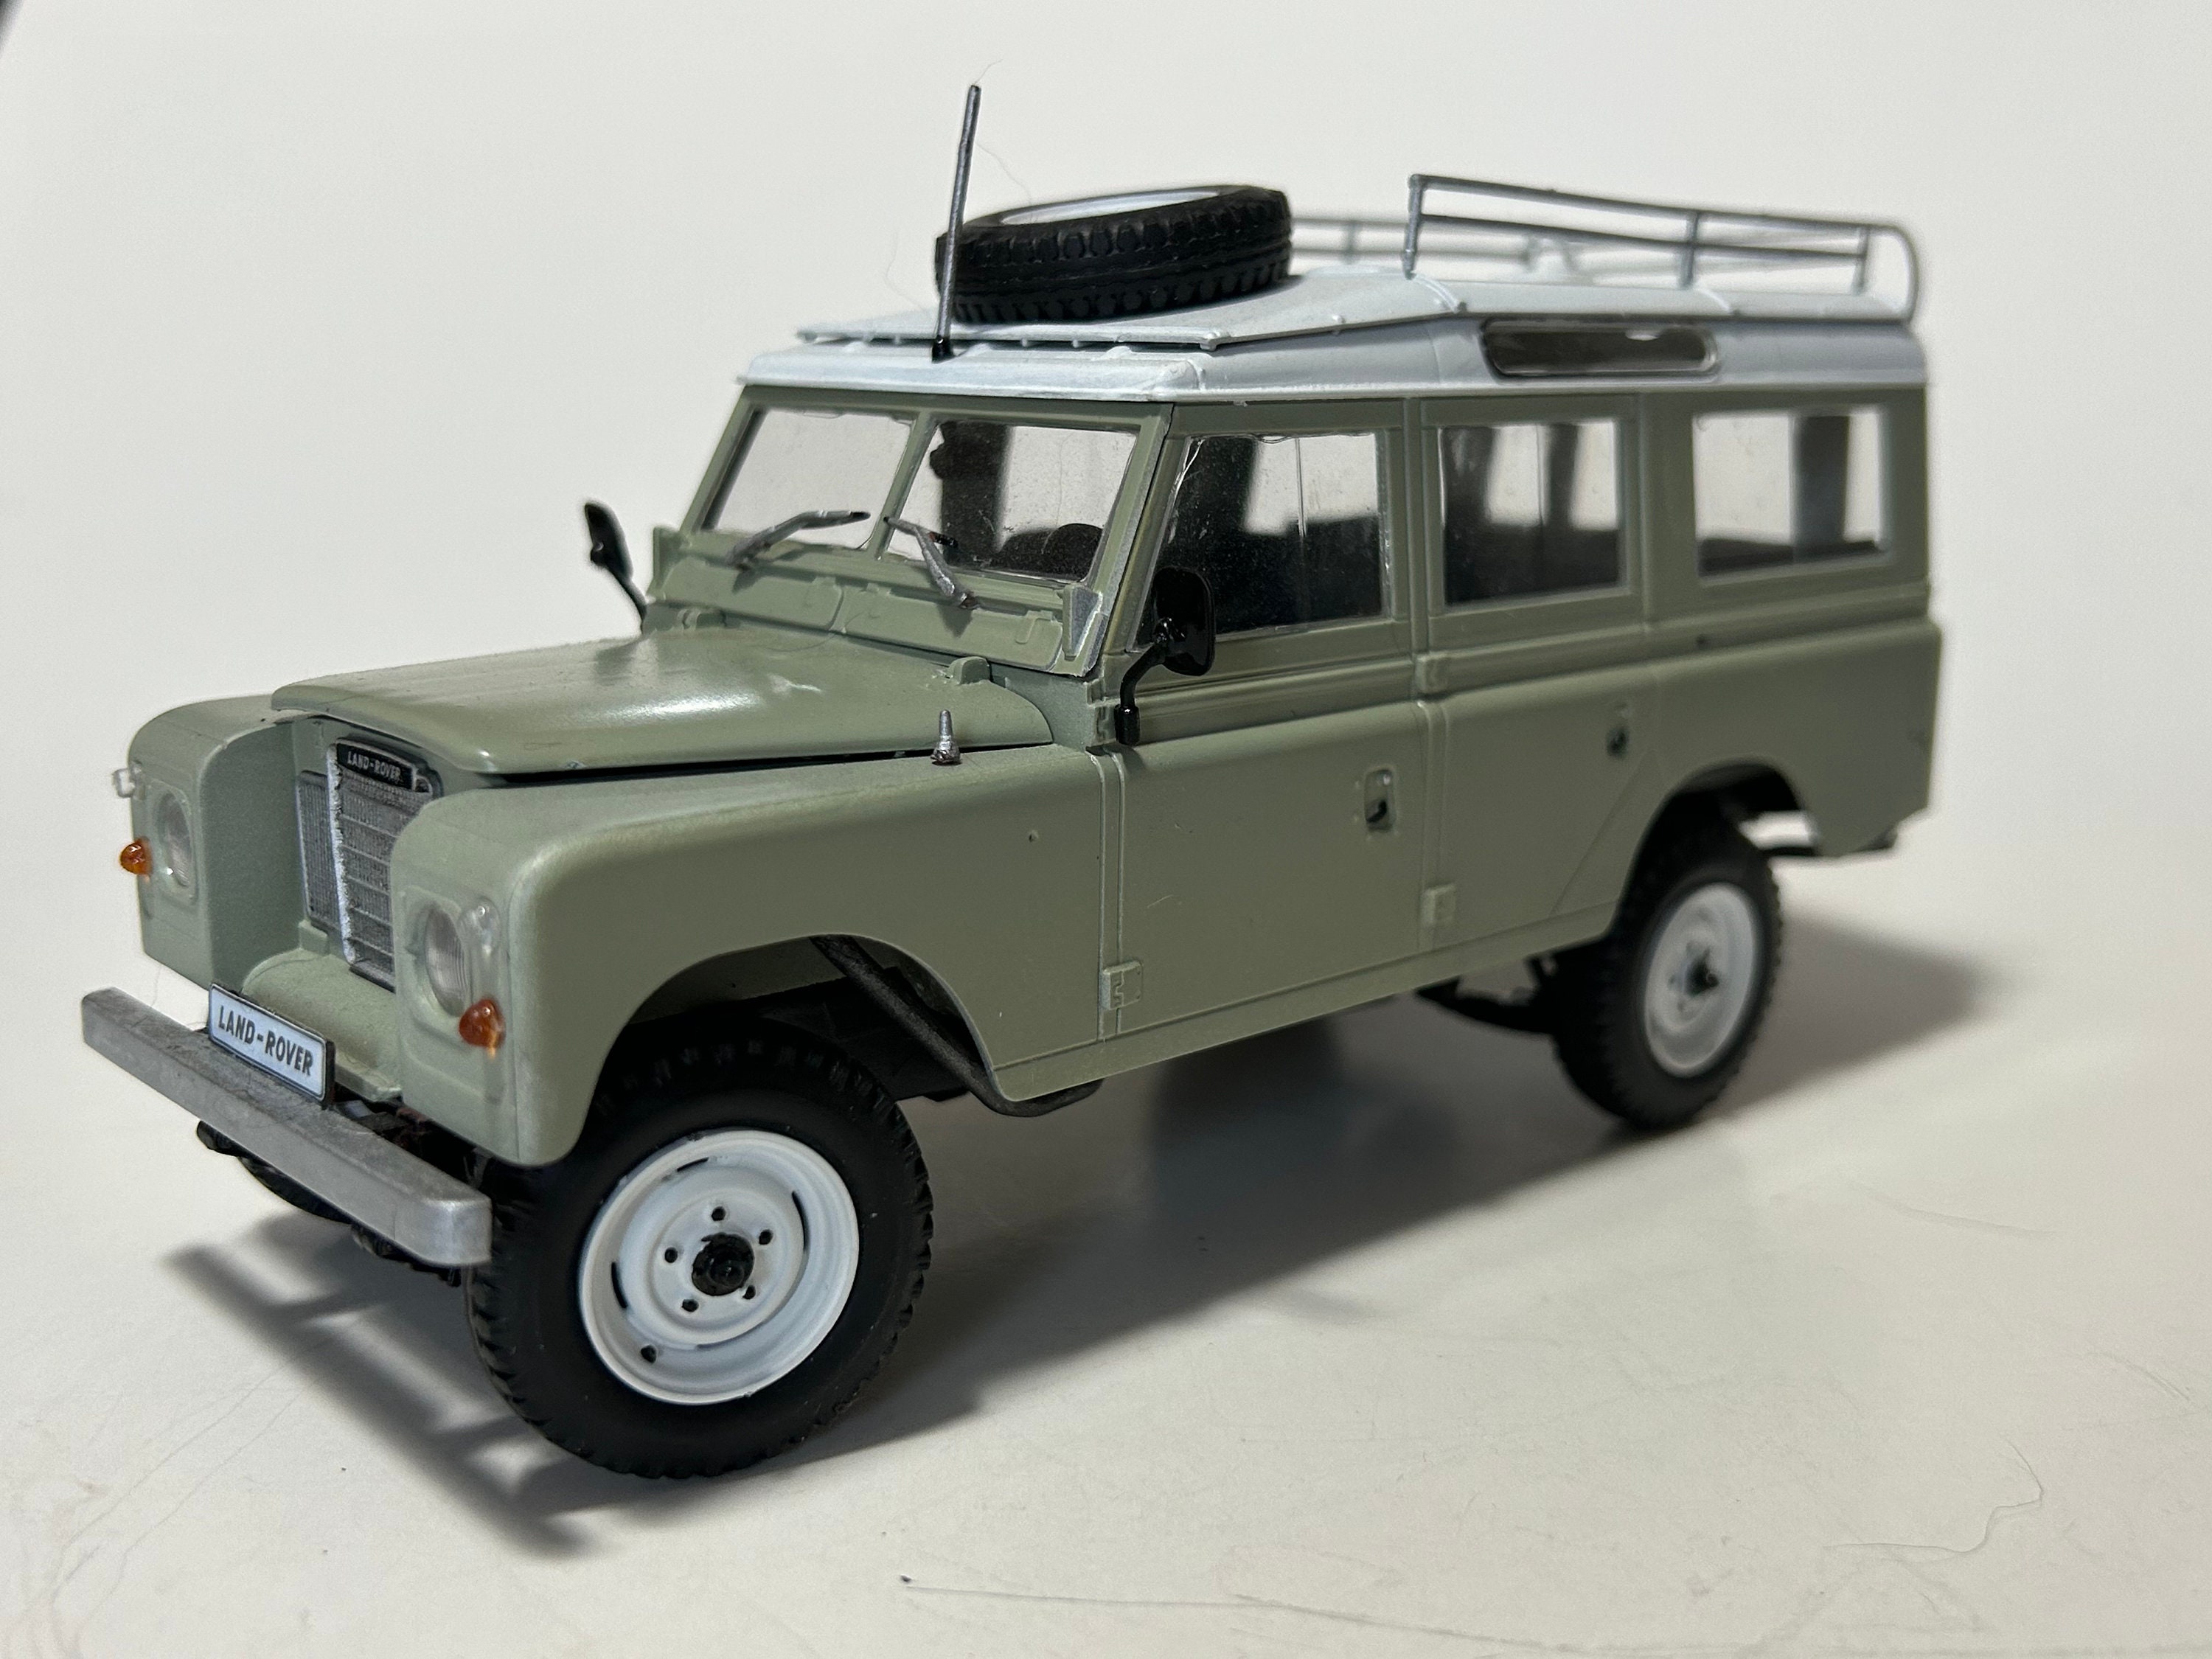 Buy Land Rover Kit Online In India Etsy India